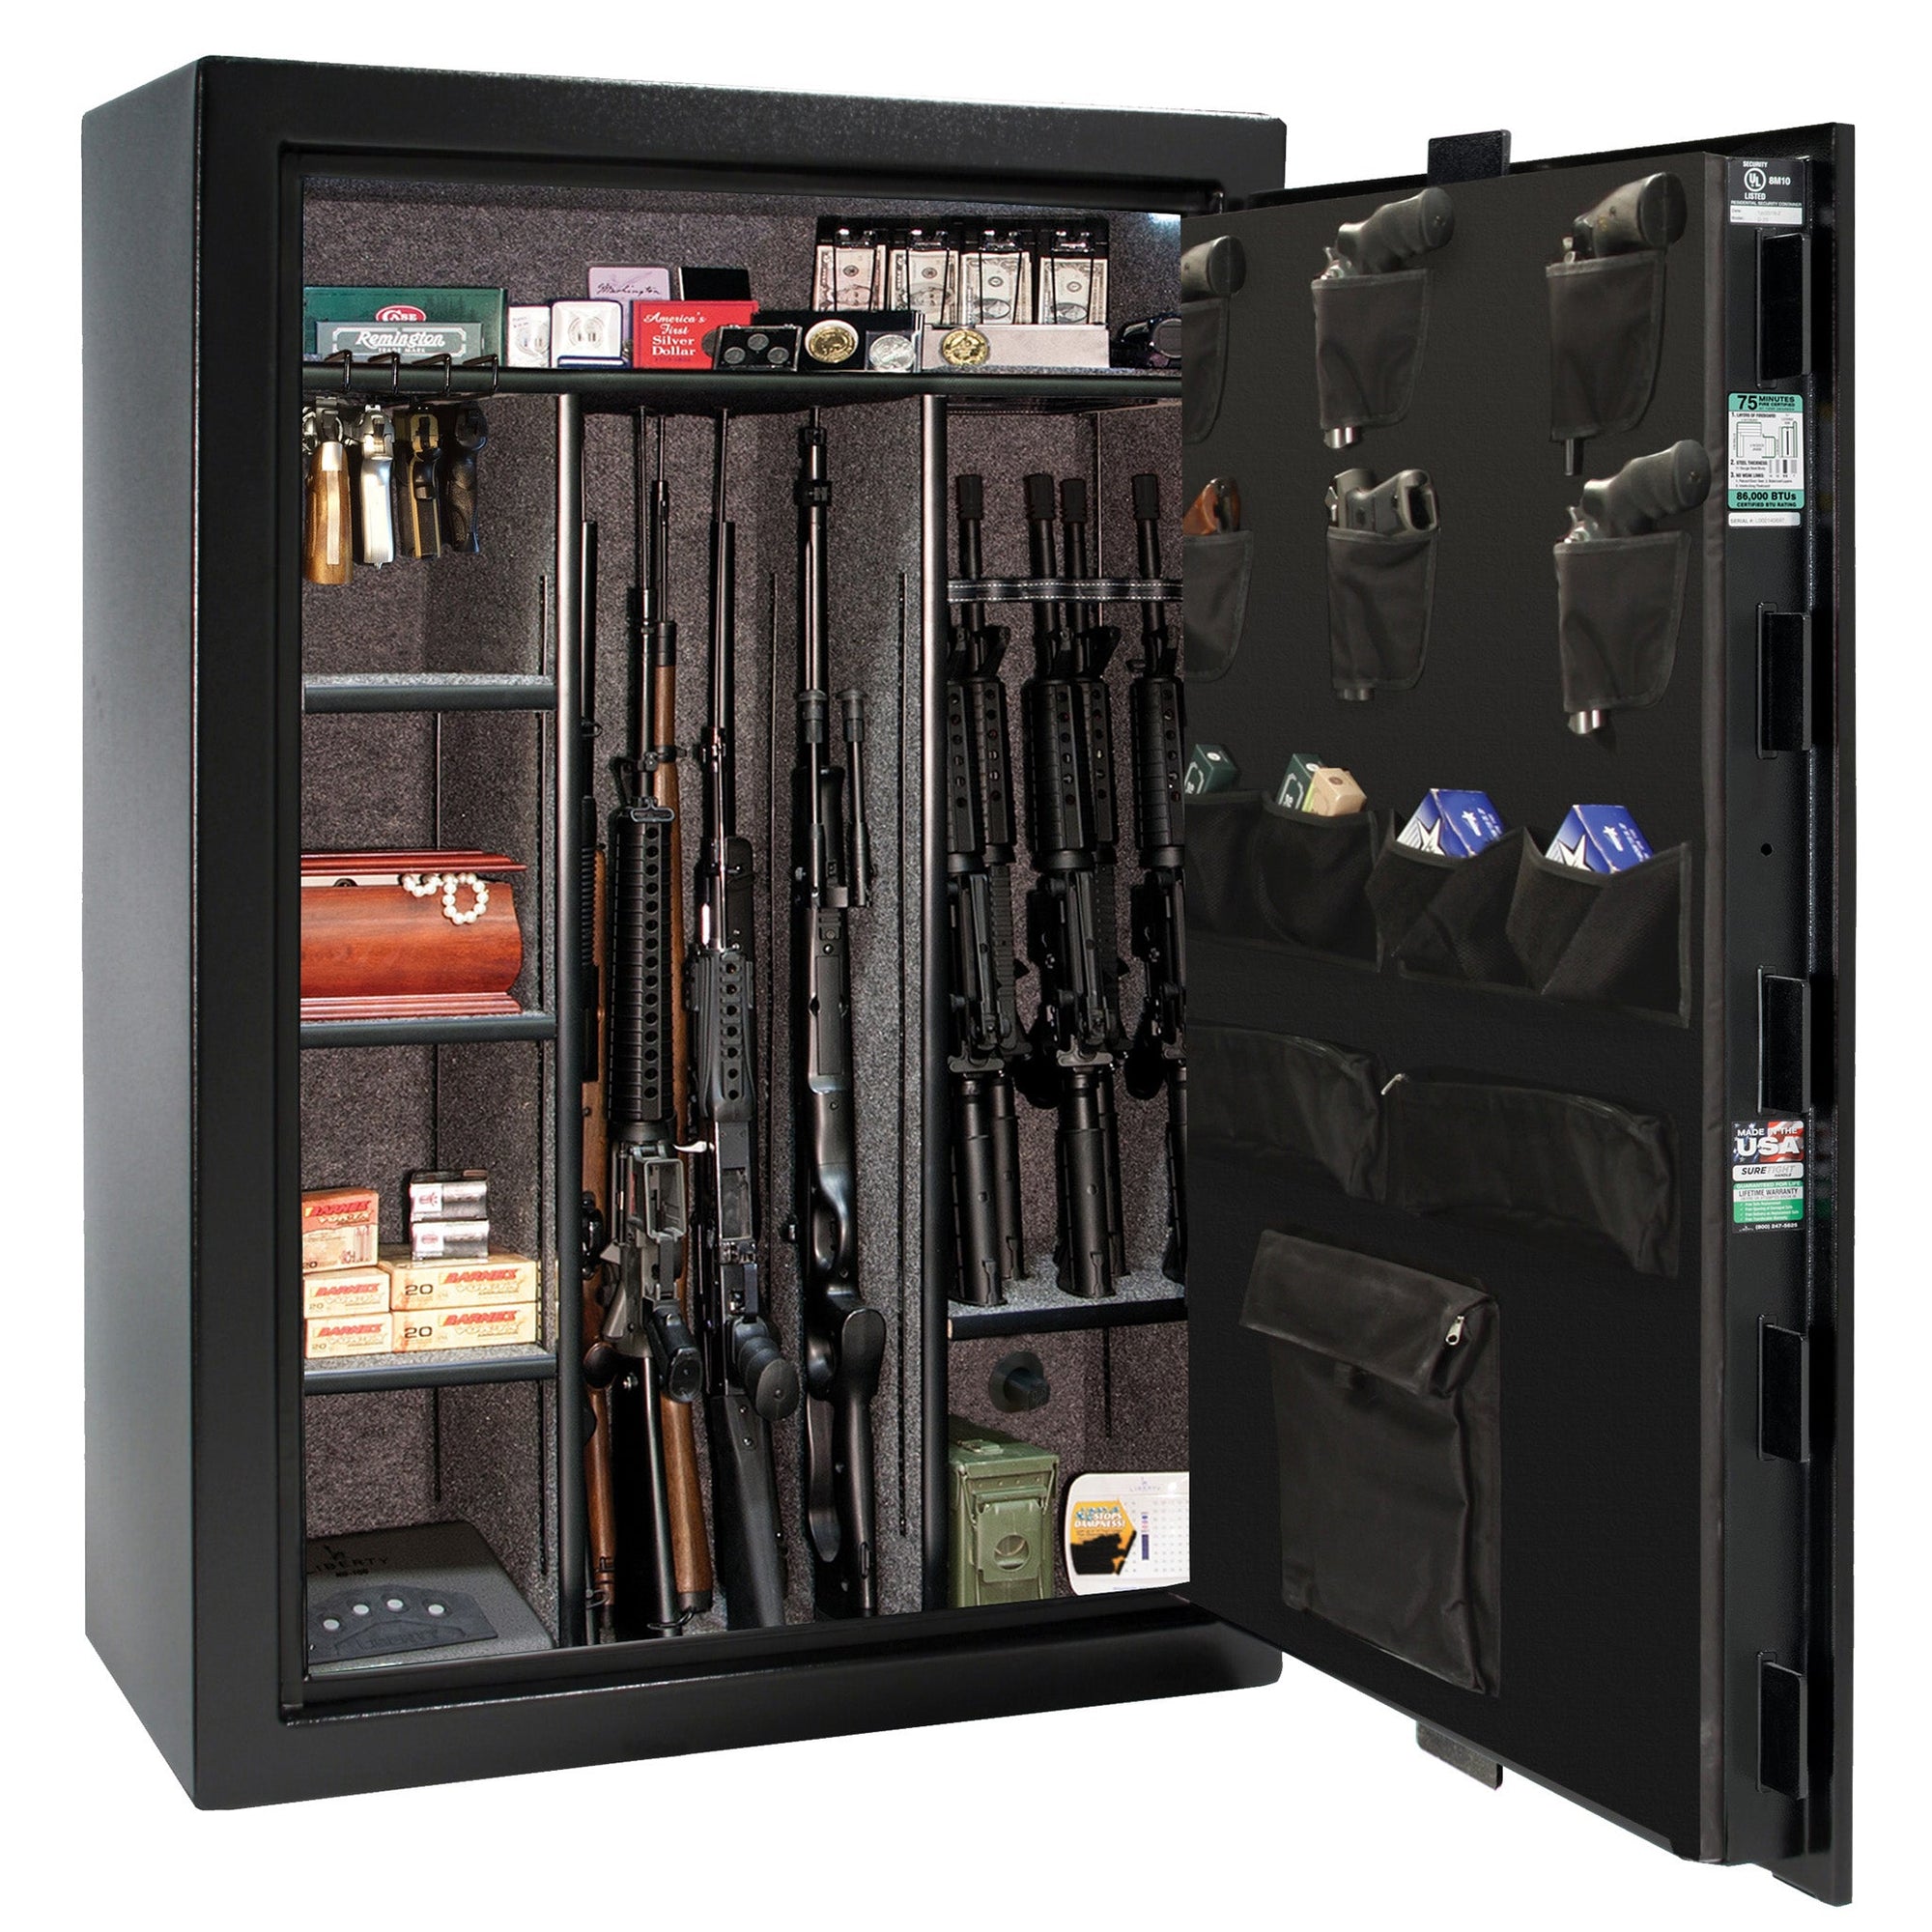 Fatboy Jr. Series | 48XT | Level 4 Security | 75 Minute Fire Protection | Dimensions: 60.5"(H) x 42"(W) x 22"(D) | Up to 48 Long Guns | Black Textured | Electronic Lock